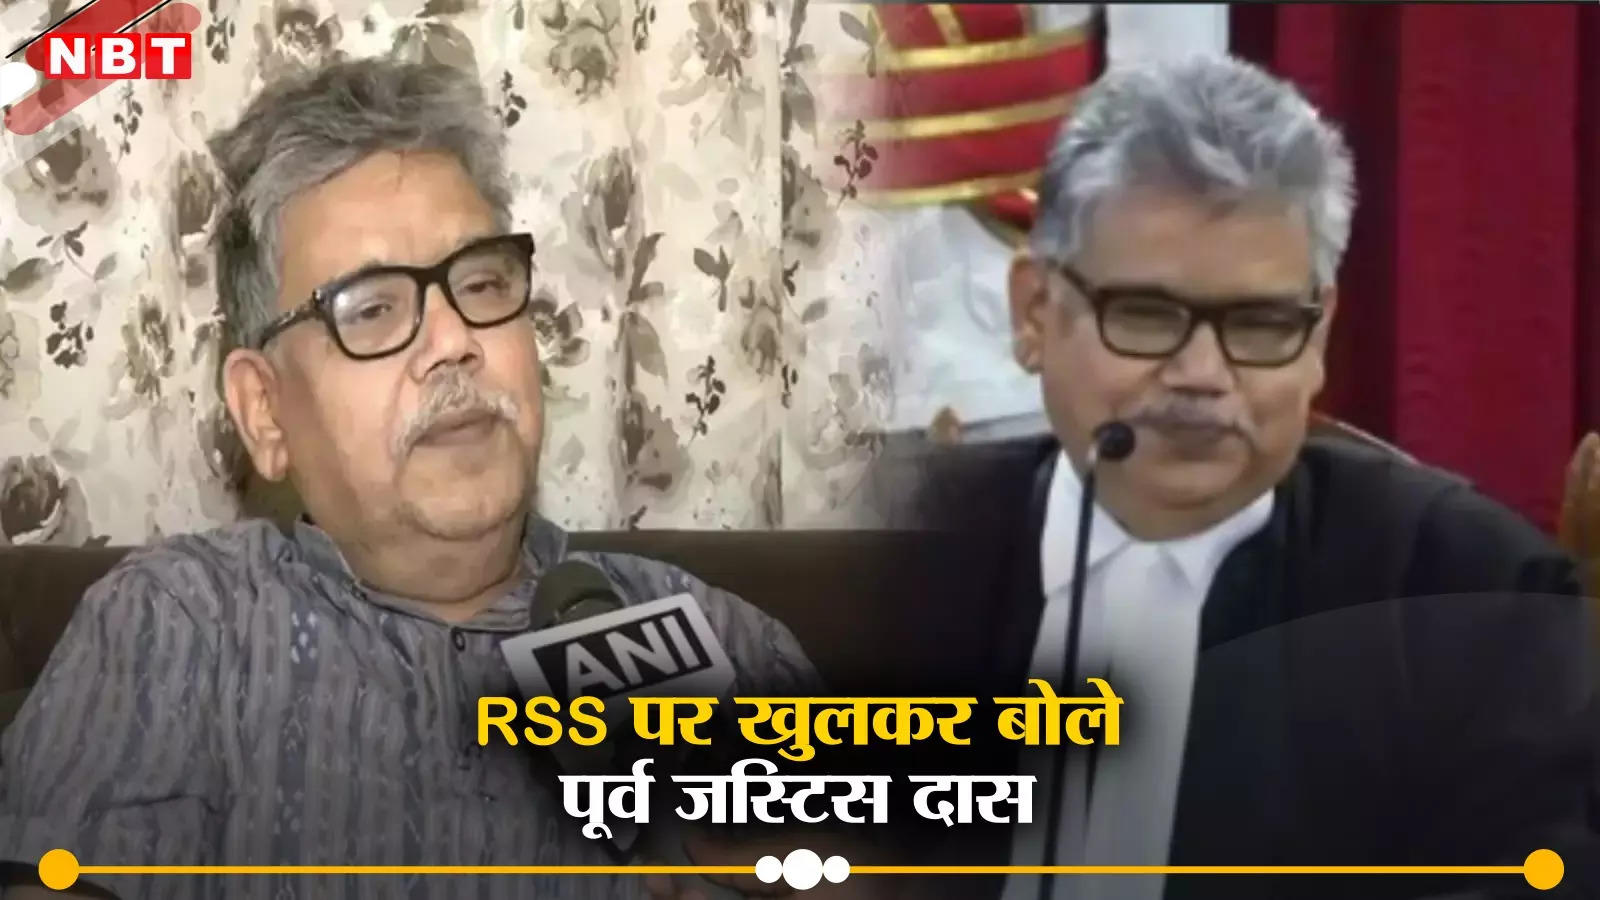 Politics is not my cup of tea… Former judge Chittaranjan Das breaks his silence on his links with the RSS and rejoining it.